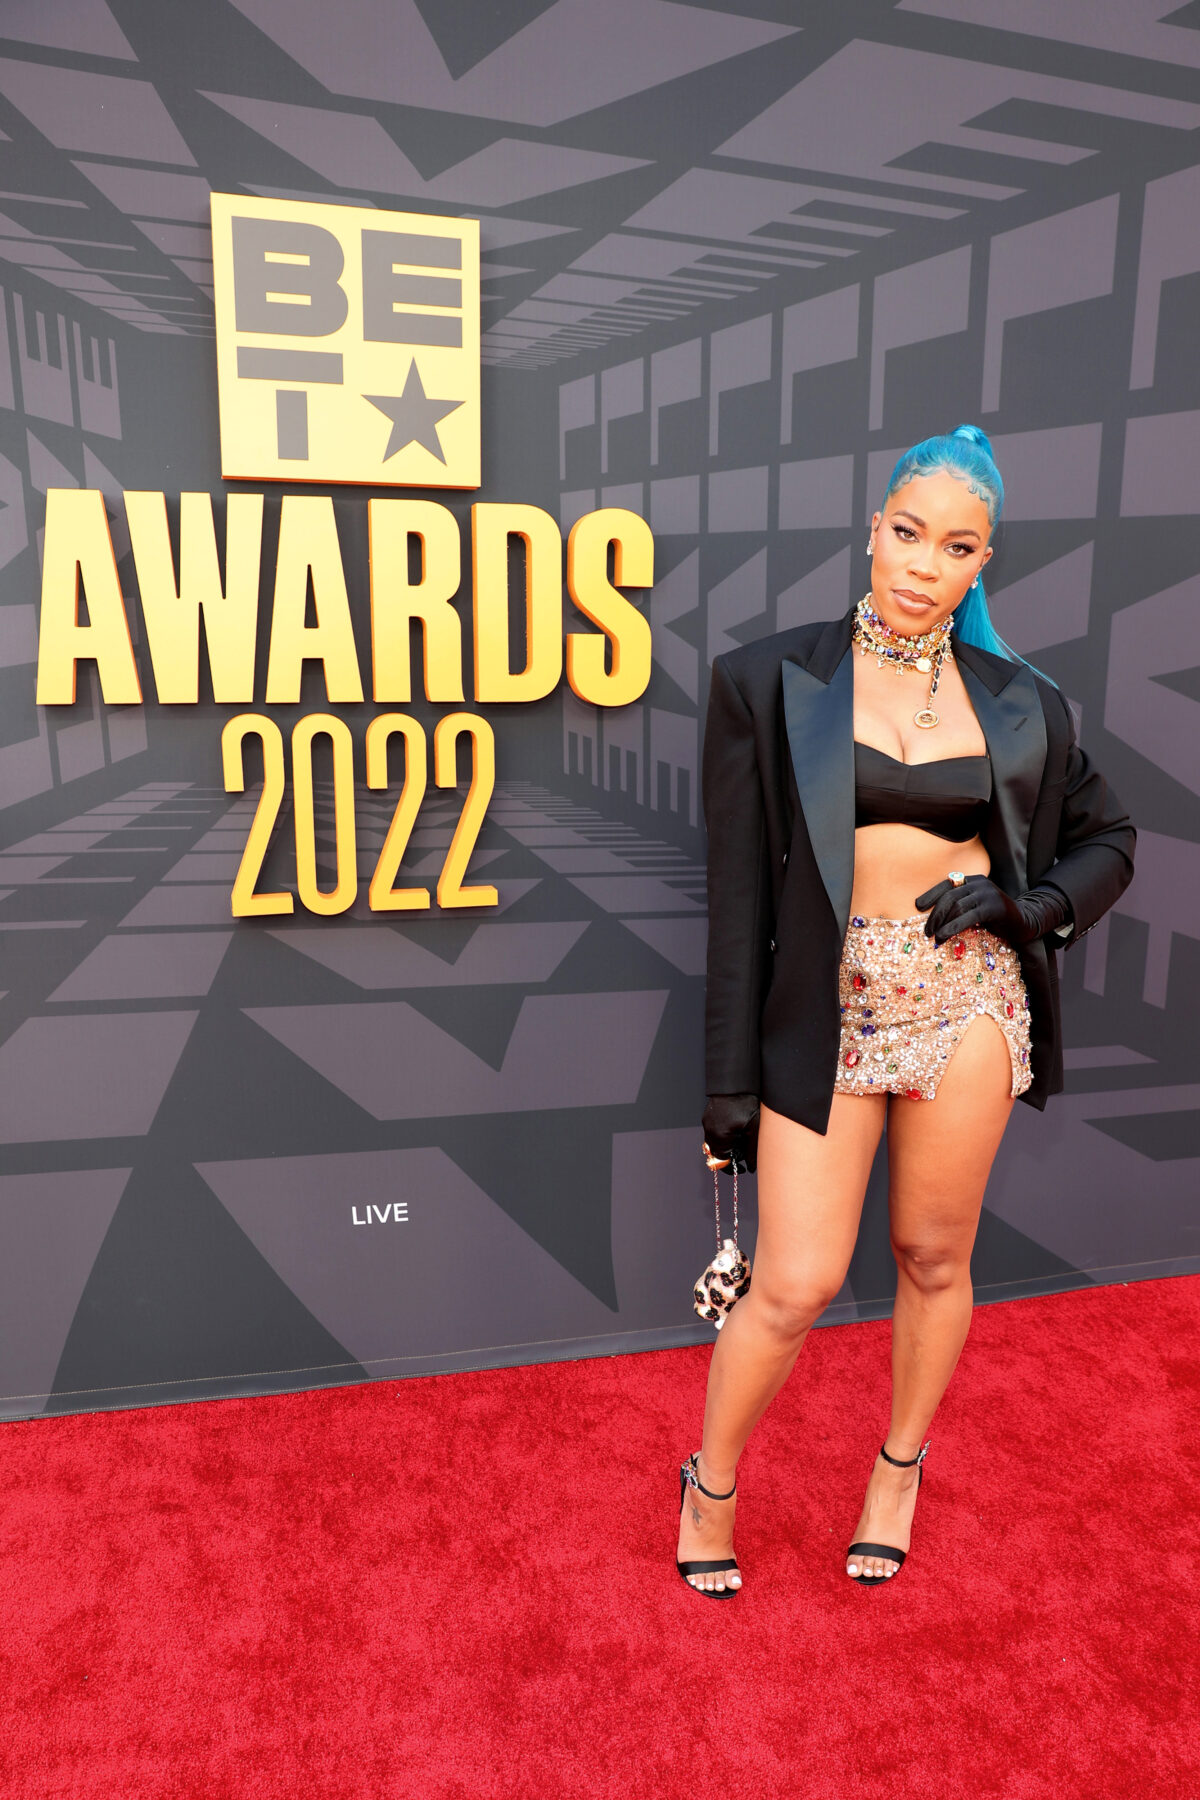 Stars rock the red carpet at the BET Awards